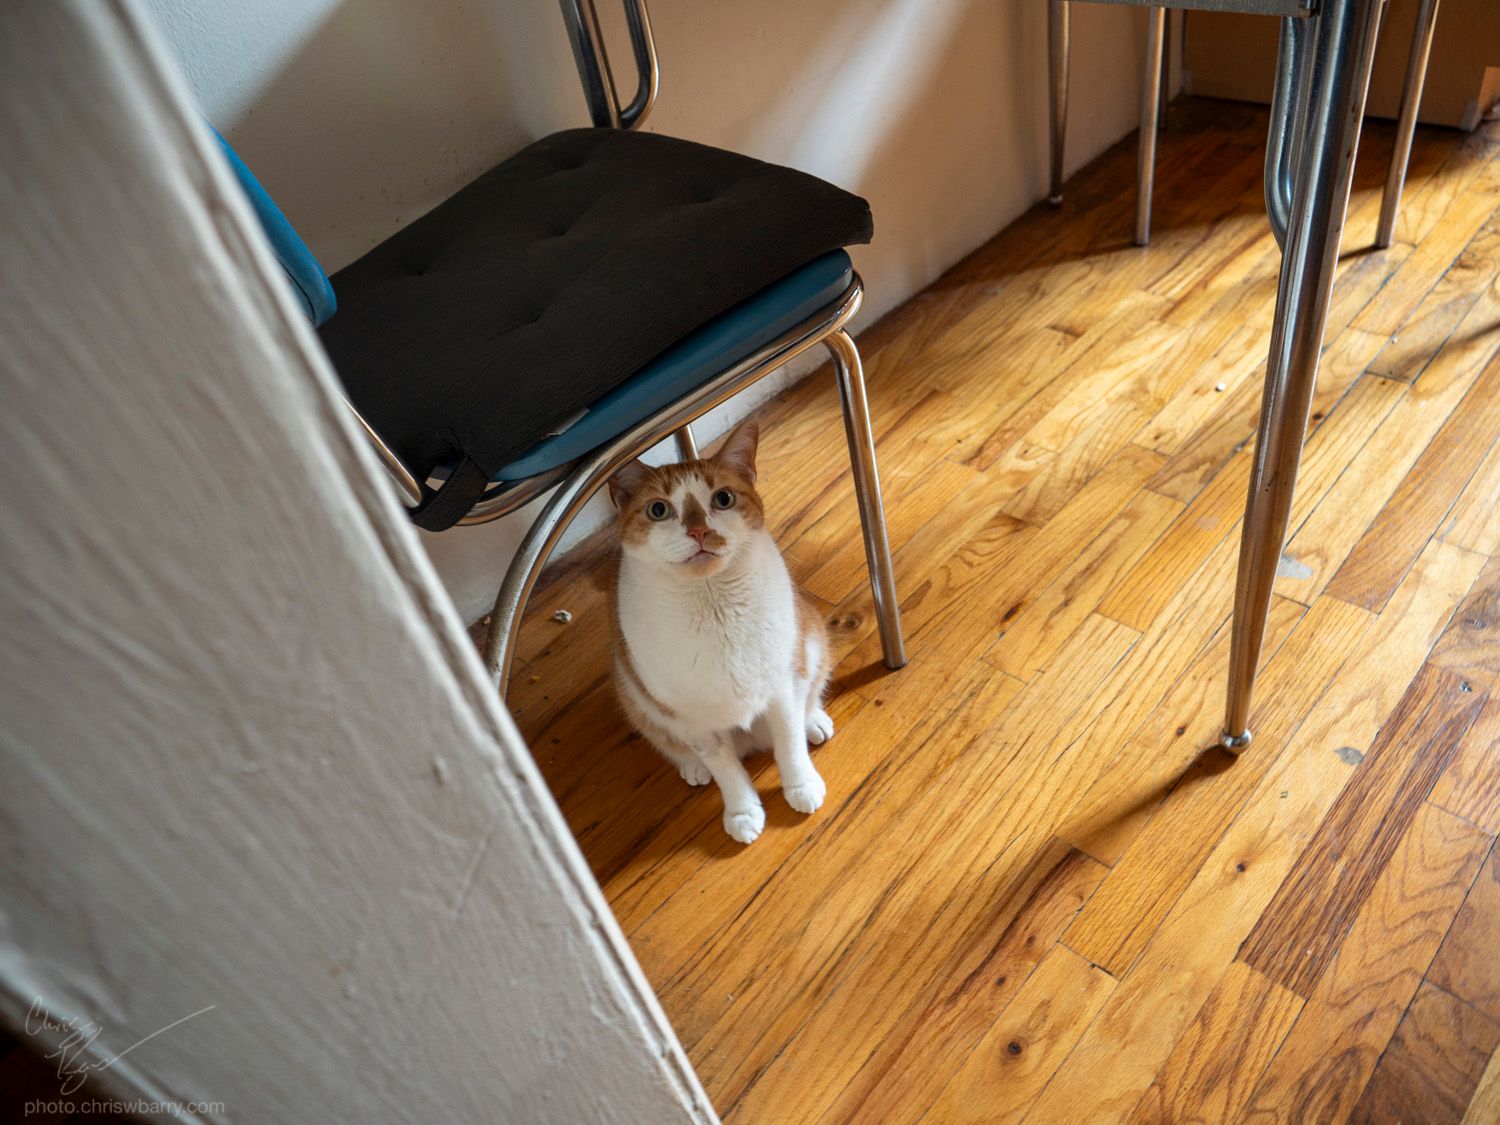 A full body image of an orange and white cat sitting underneath a chair, looking directly into the camera